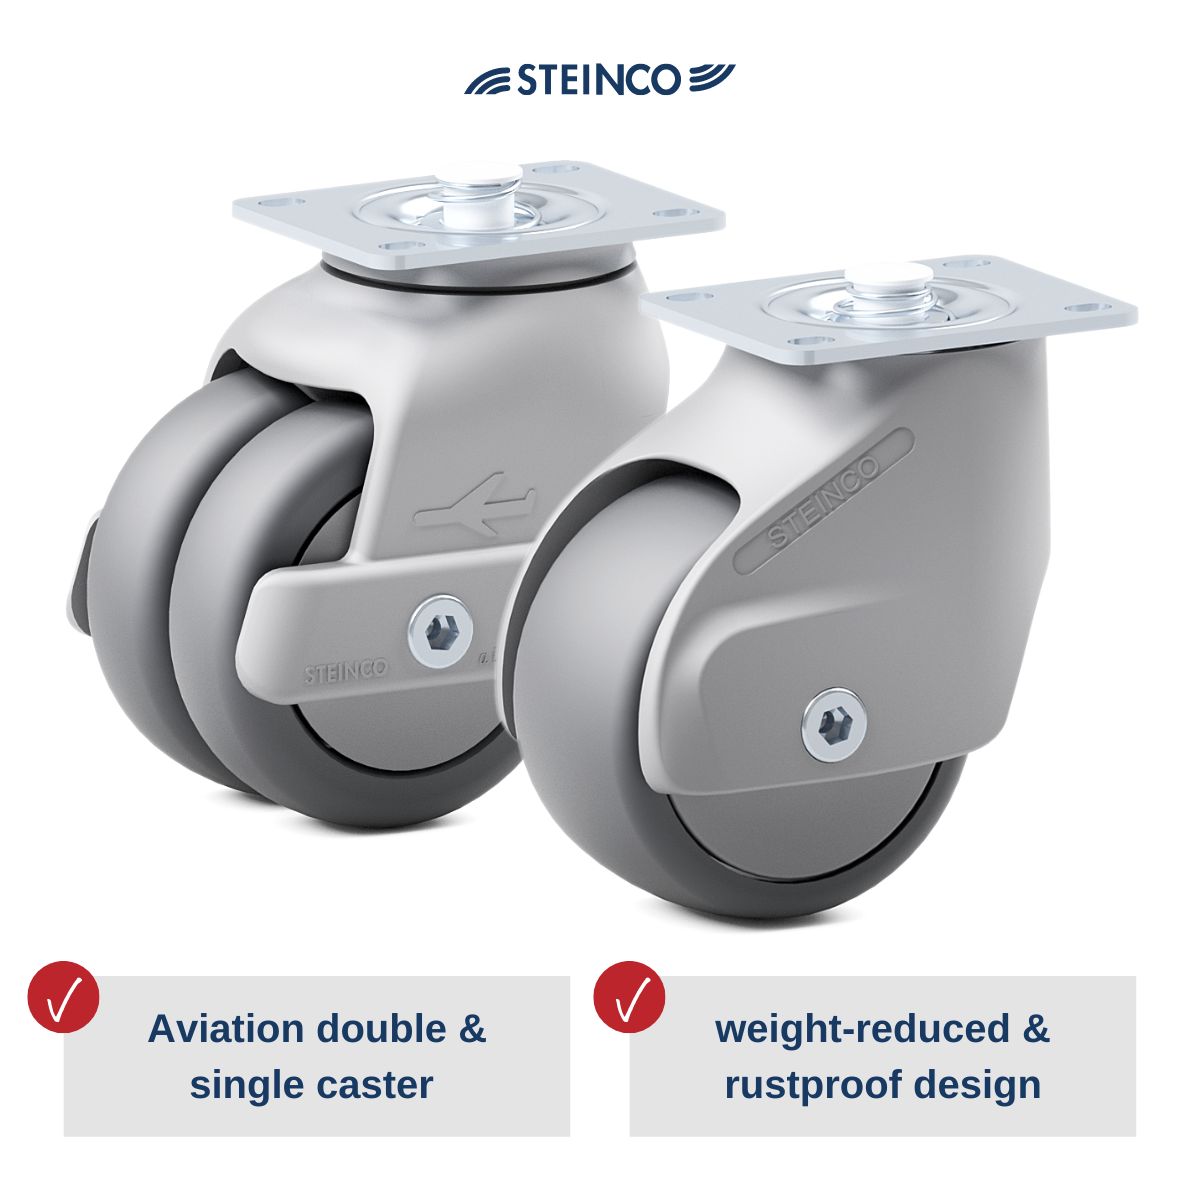 Steinco airline casters & wheels for aircraft serving cart & trolley, maneuverable in tight spaces, lightweight, safe & specially designed for aviation.